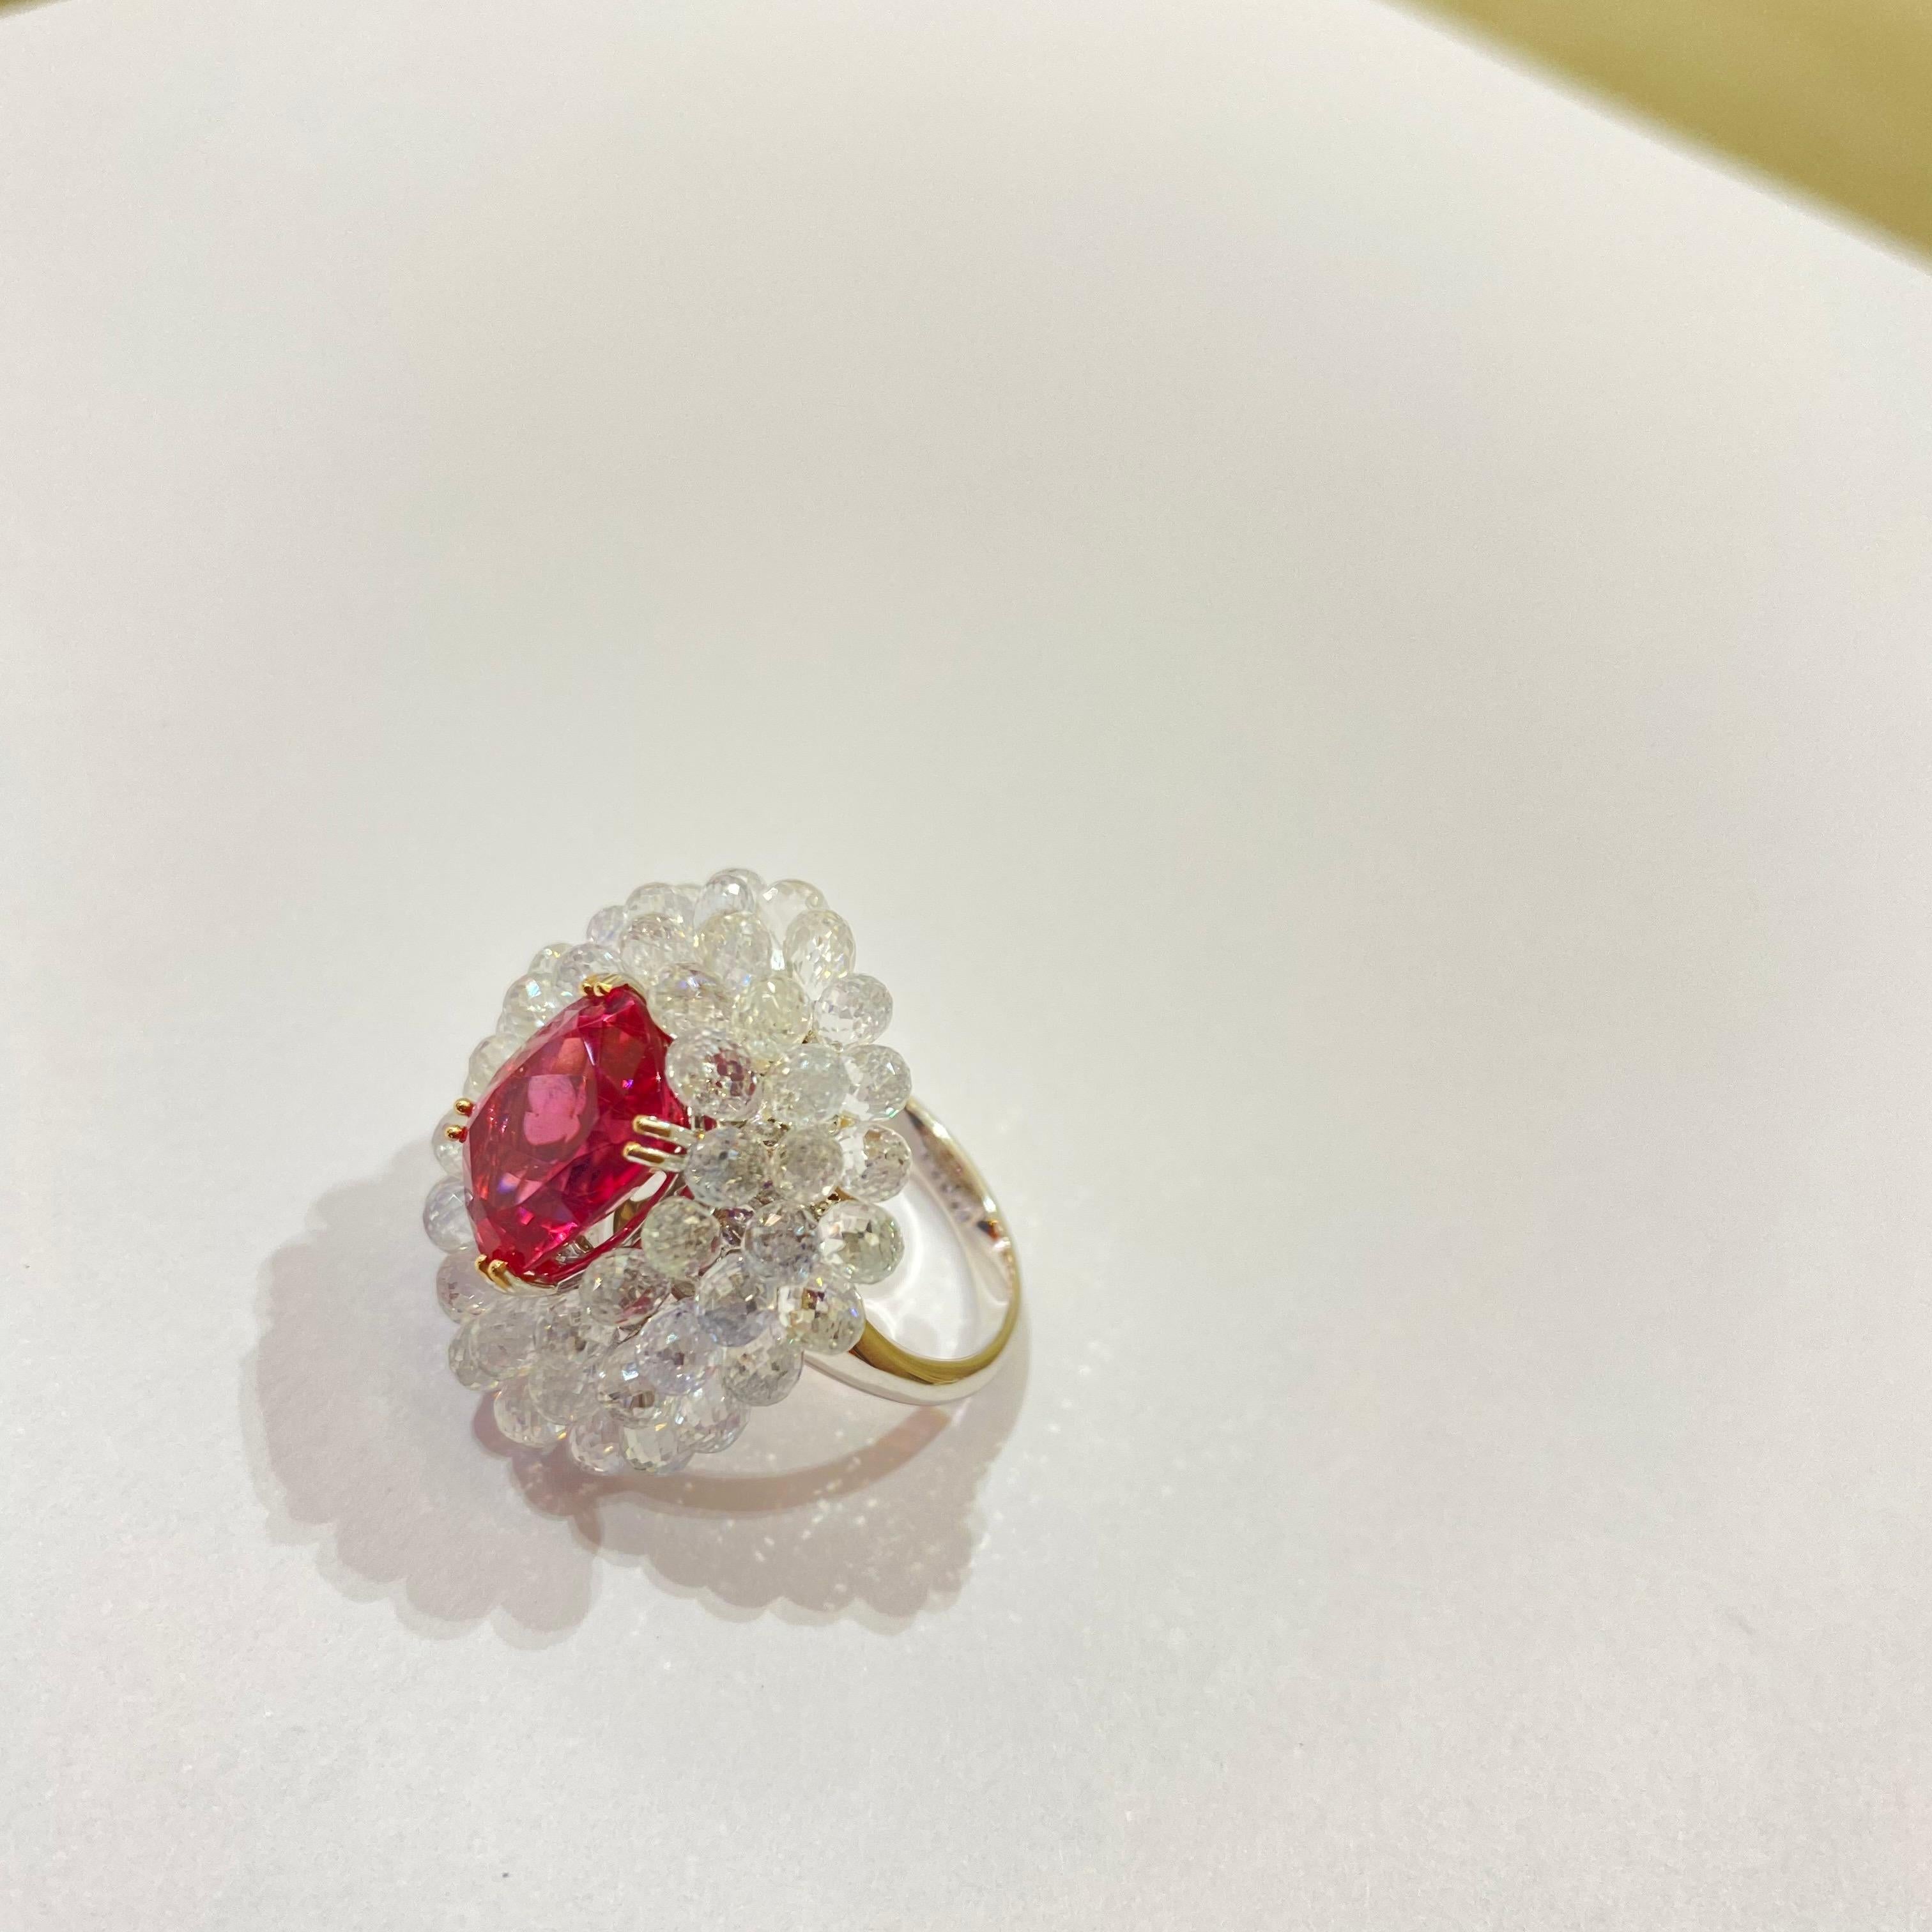 Neoclassical Big Flower Ring 18 Karat Gold with Red Tourmamline and White Sapphires Drops For Sale